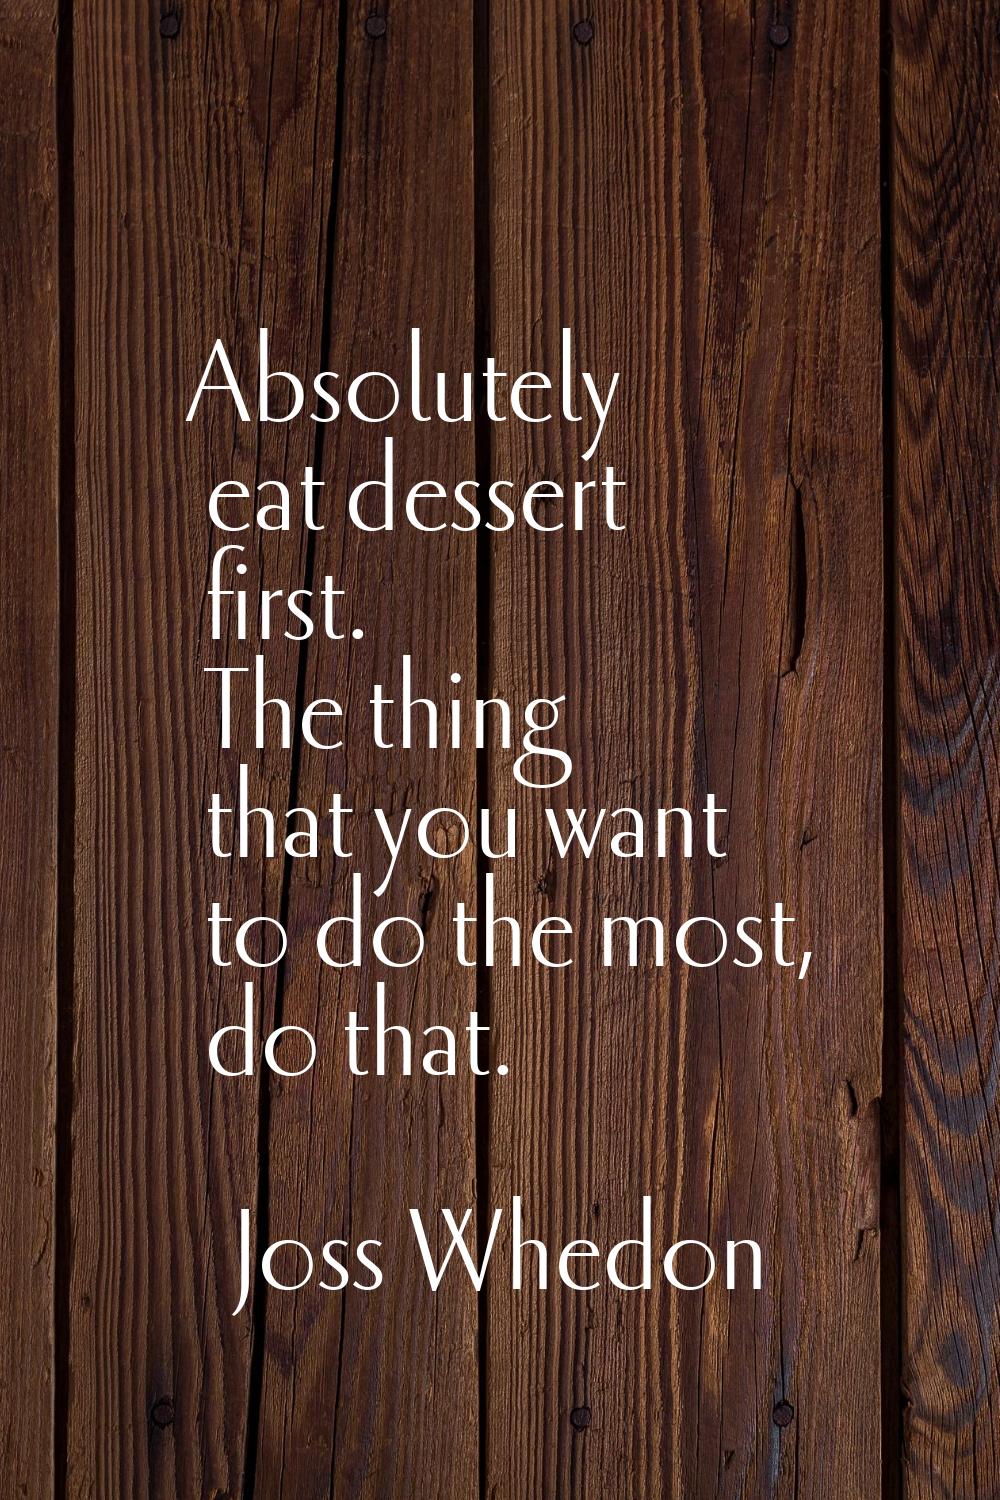 Absolutely eat dessert first. The thing that you want to do the most, do that.